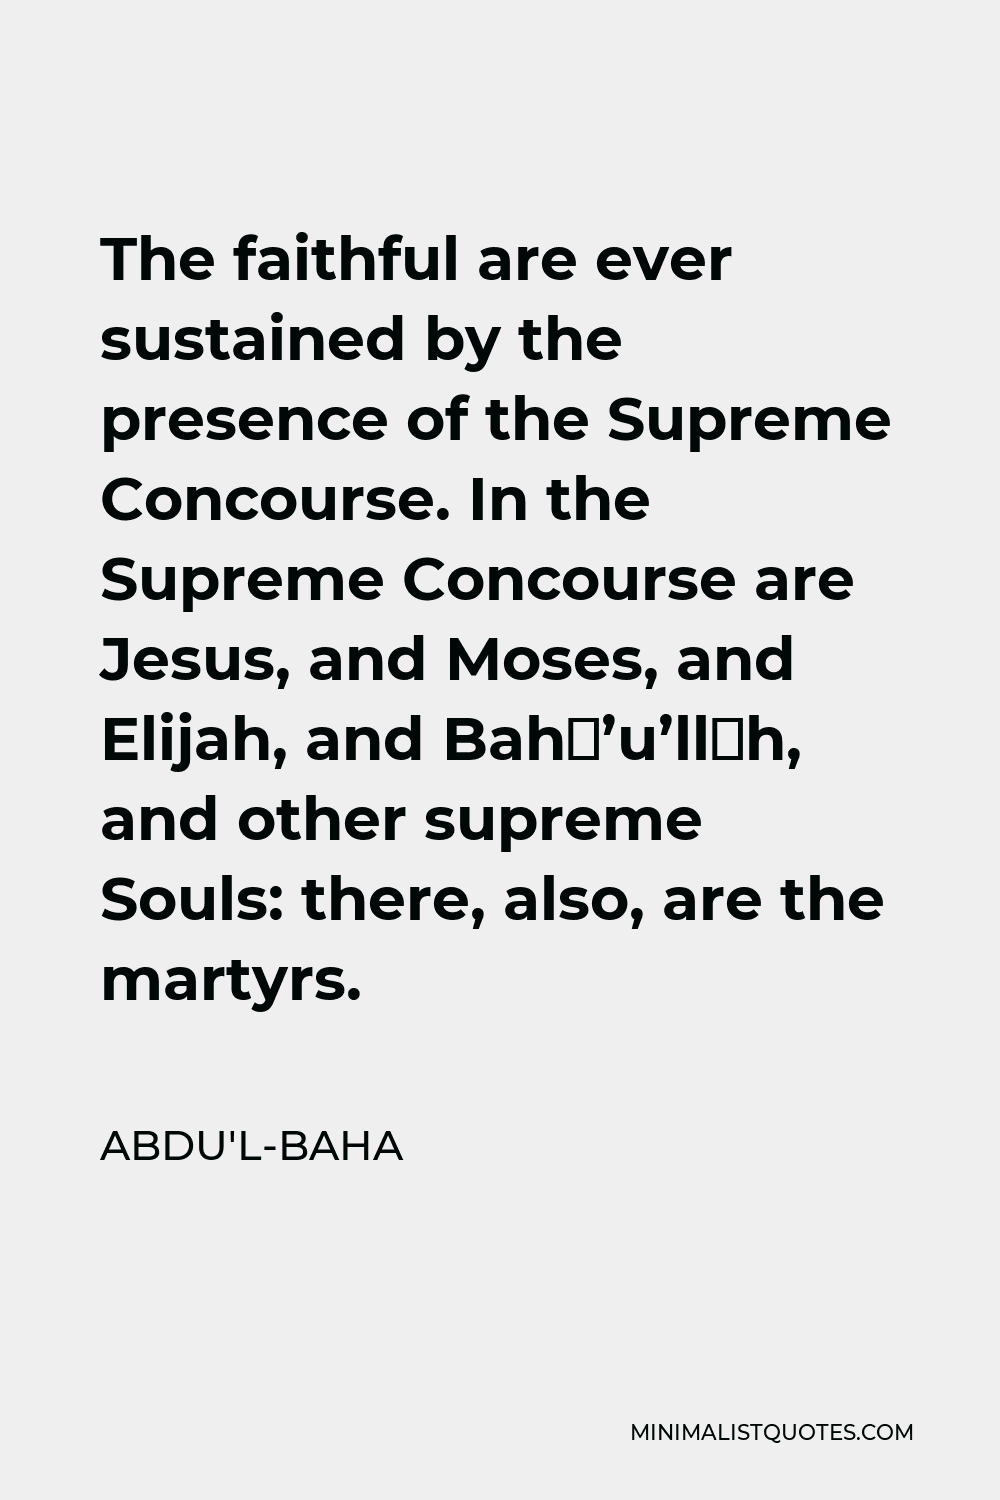 Abdu'l-Baha Quote - The faithful are ever sustained by the presence of the Supreme Concourse. In the Supreme Concourse are Jesus, and Moses, and Elijah, and Bahá’u’lláh, and other supreme Souls: there, also, are the martyrs.